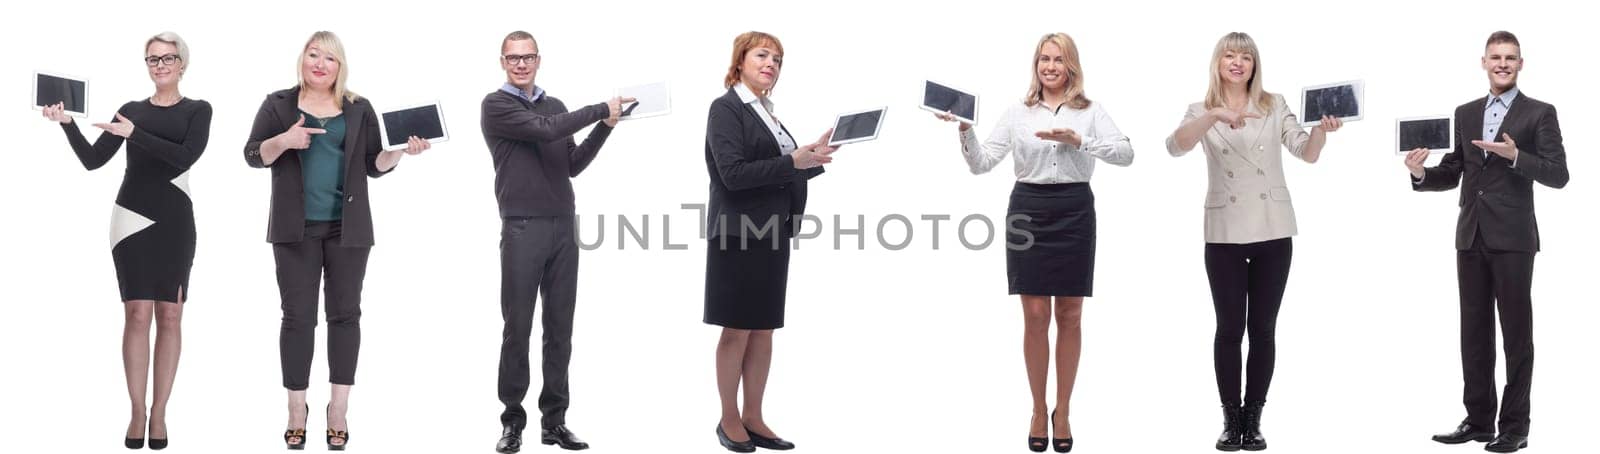 group of people demonstrating tablet isolated on white by asdf